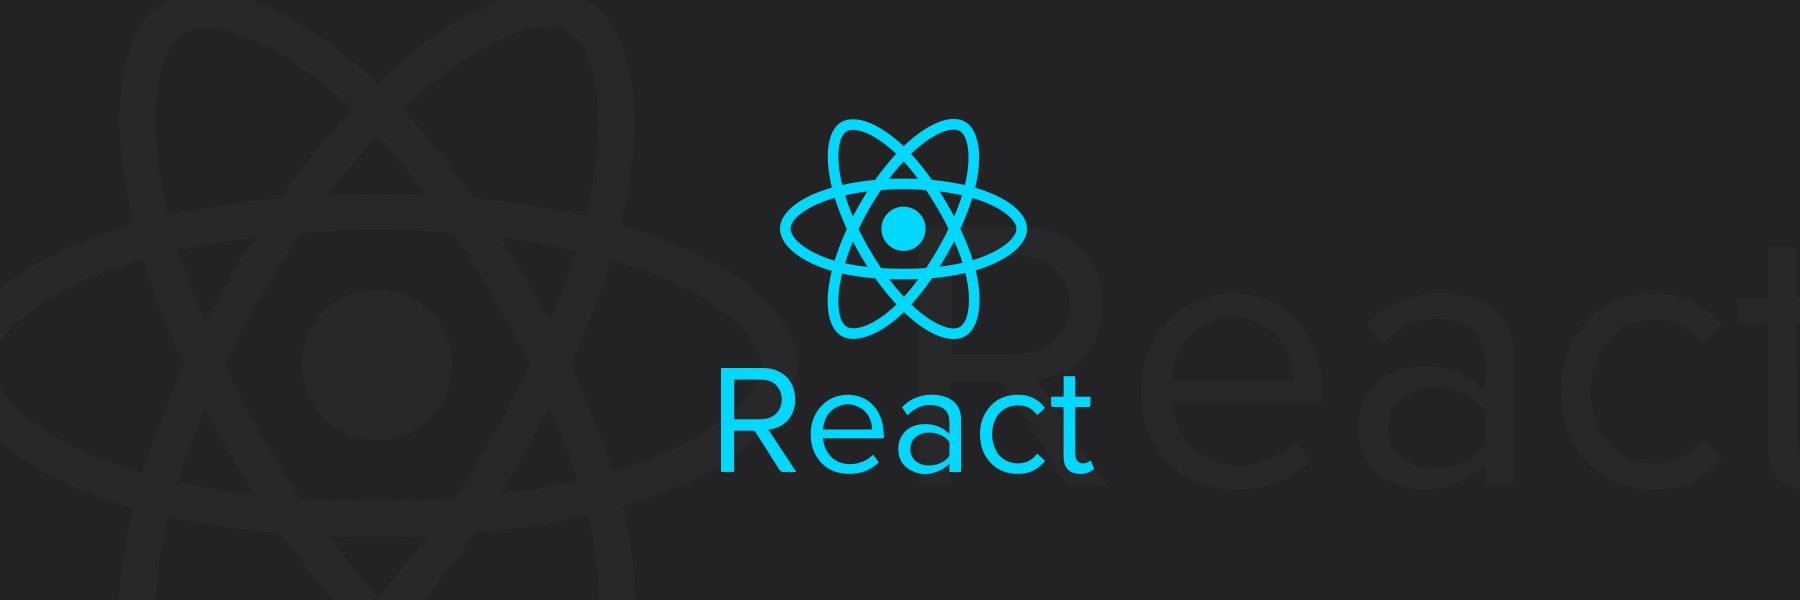 React: The great Abstraction